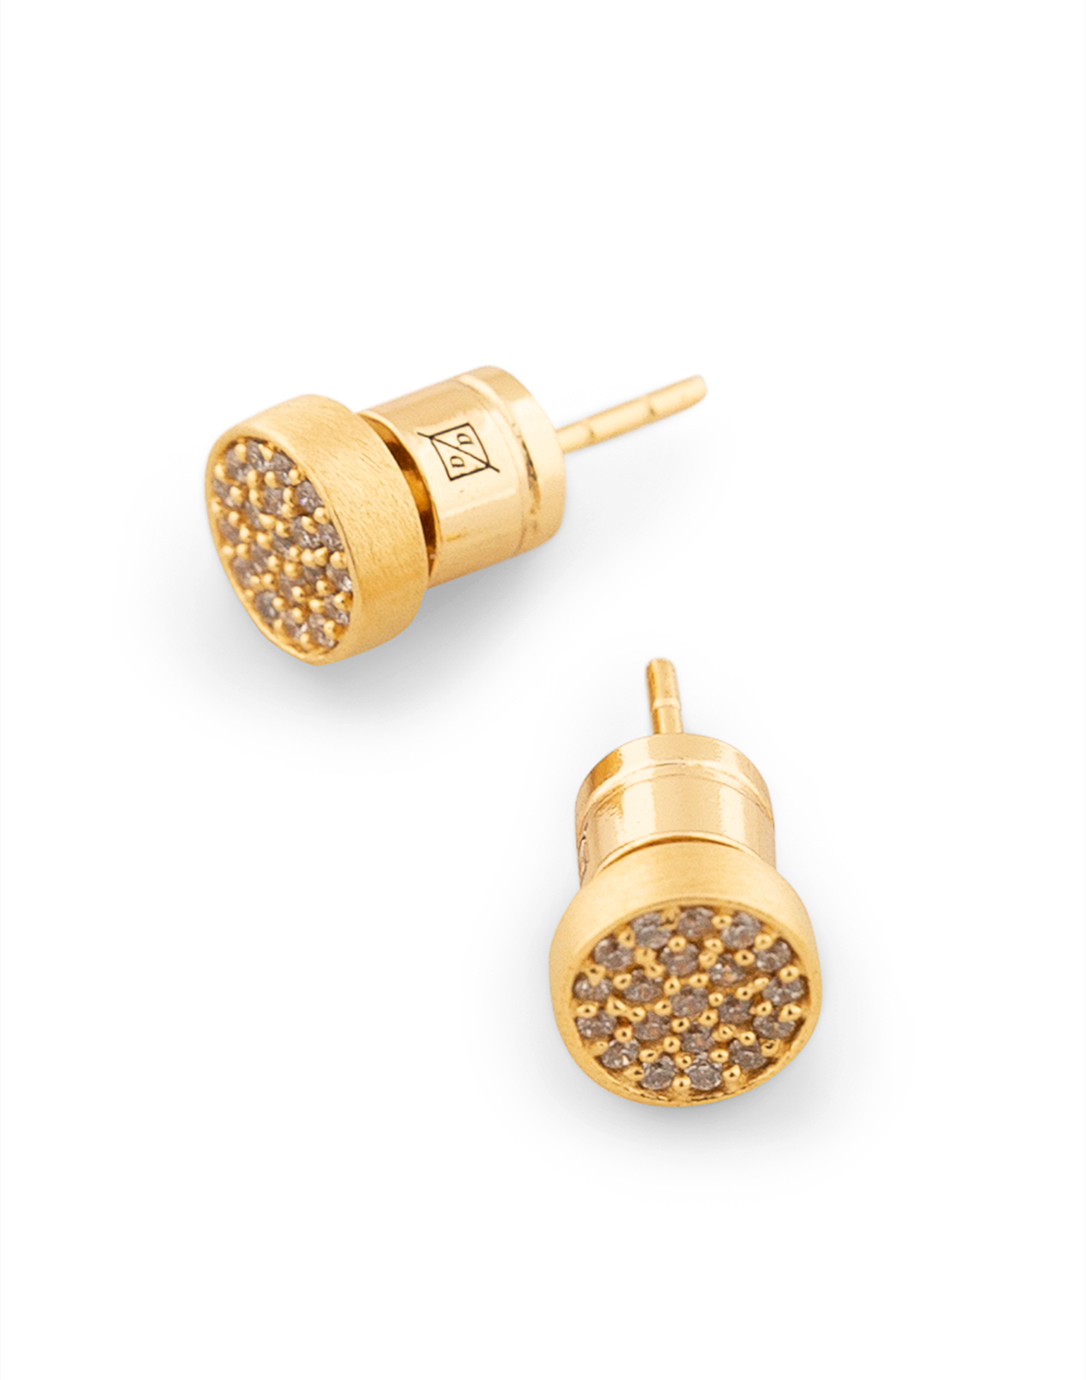 Gold Signature Pave Stud Earrings